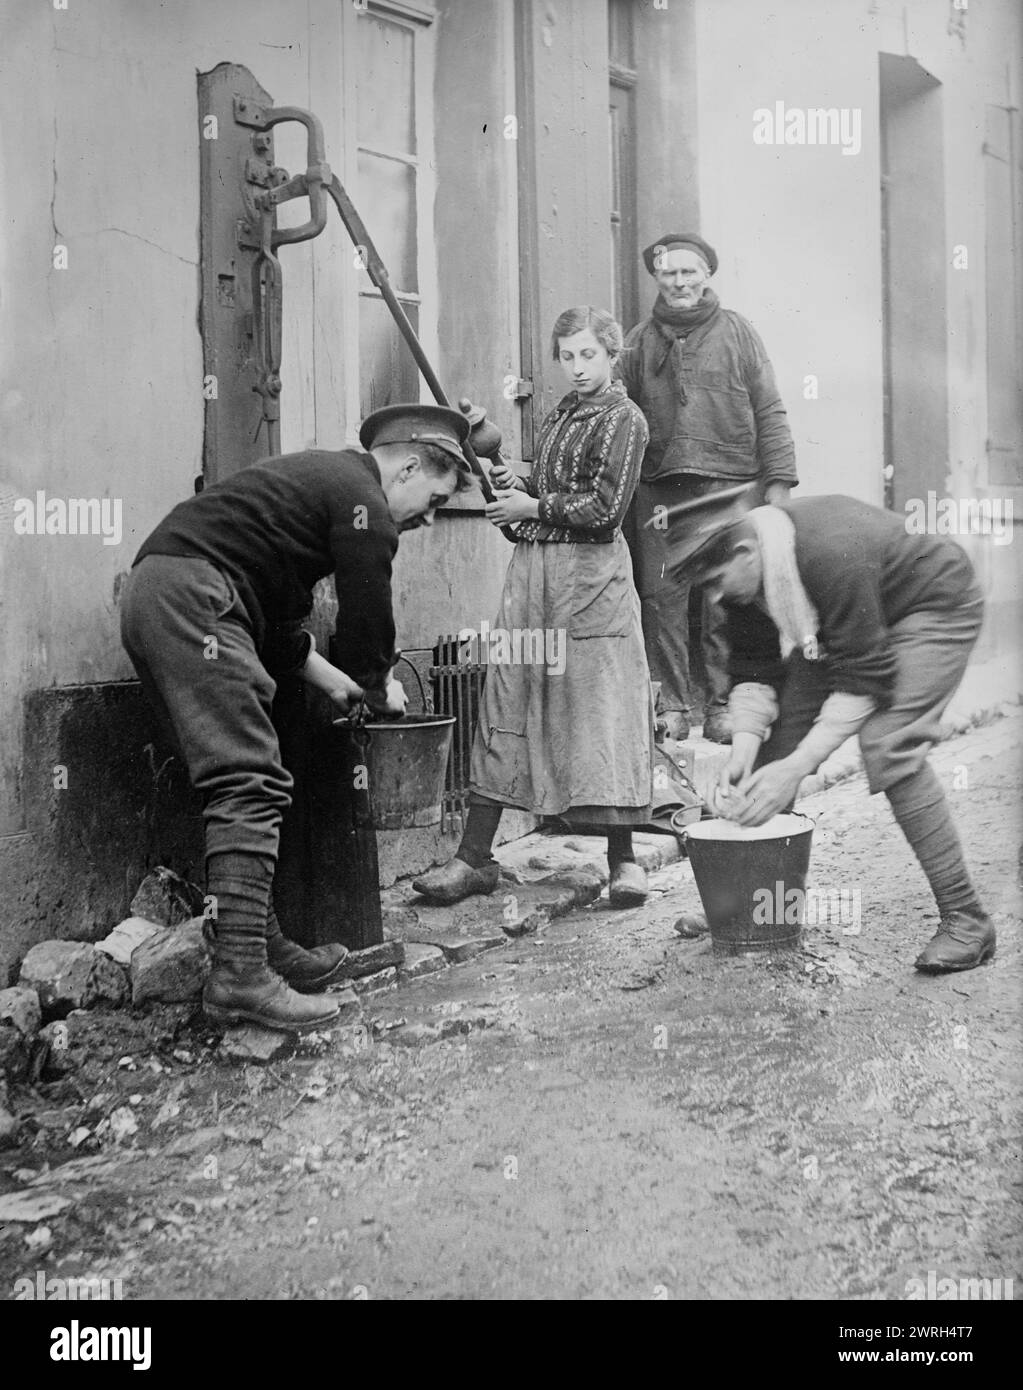 Tommy Atkins at Etaples, between 1914 and c1915. Two British soldiers called &quot;Tommys,&quot; helping some local residents at a water pump, E&#xb4;taples, France, during World War I. Stock Photo